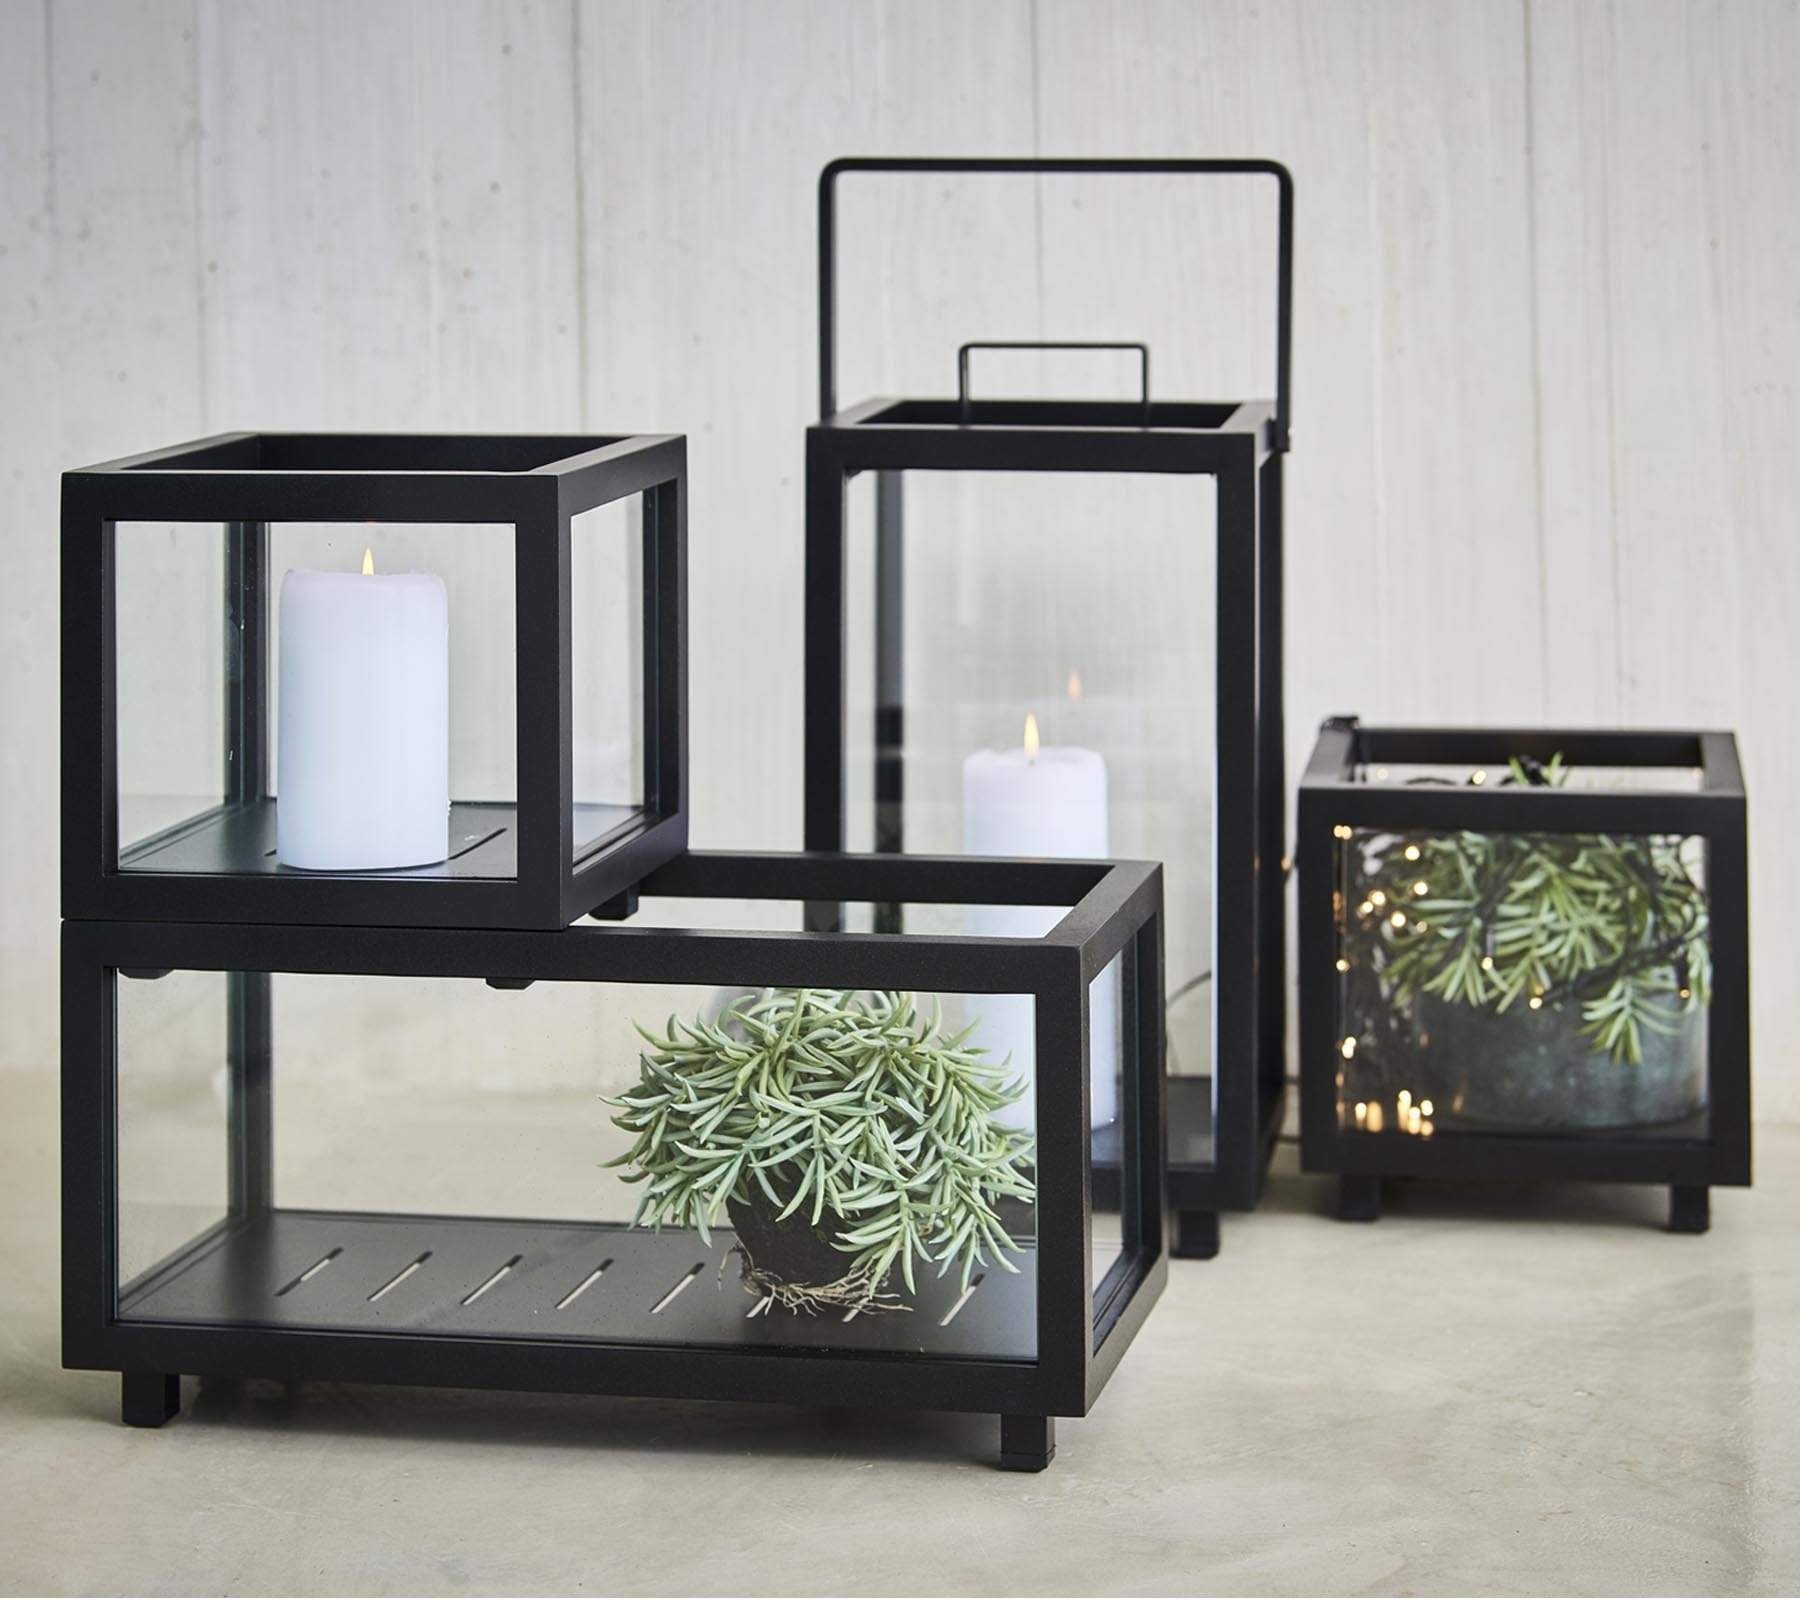 Boxhill's lava grey outdoor rectanglular light box together with other sizes of light box with candles and plants inside